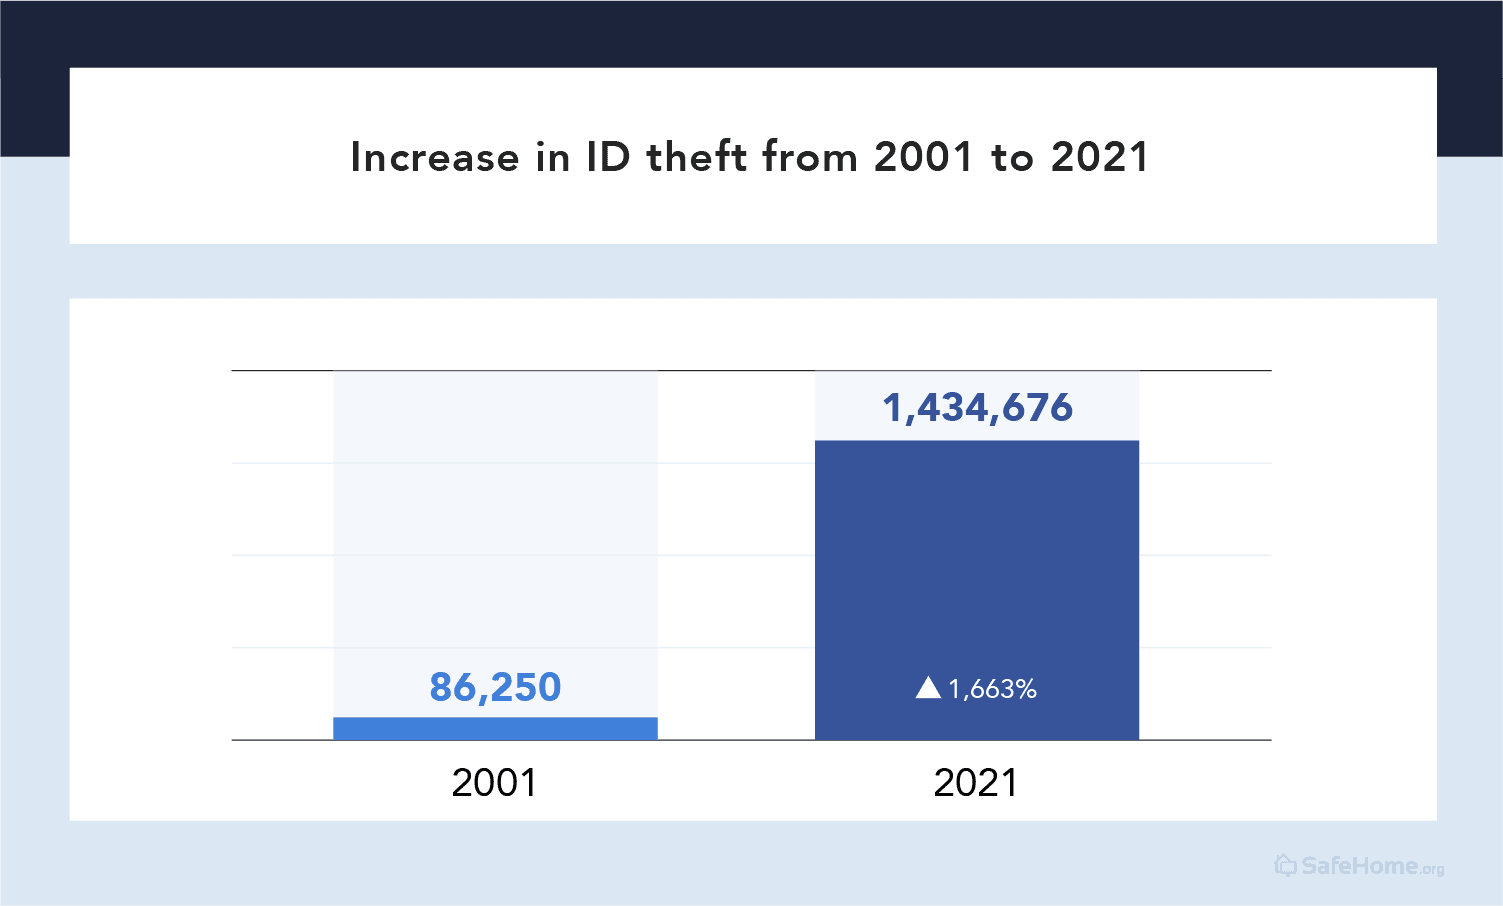 Increase in ID theft from 2001 to 2021